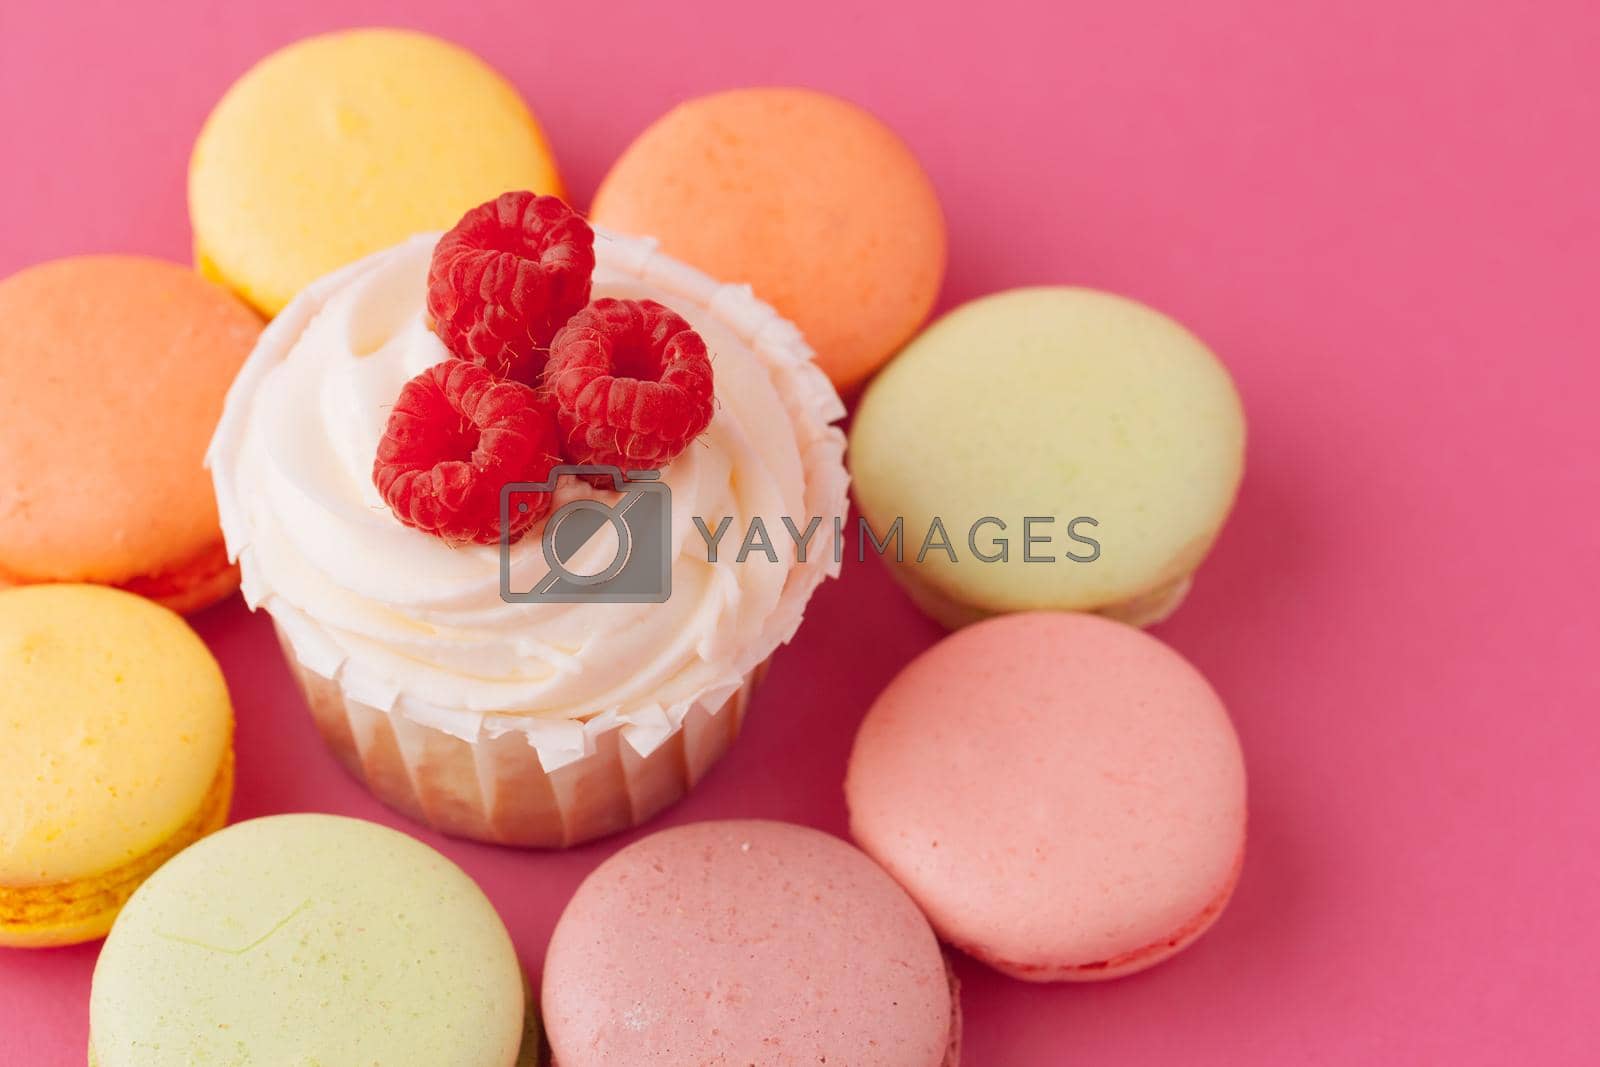 Royalty free image of Yummy sweet cupcakes on light pink background by Fabrikasimf